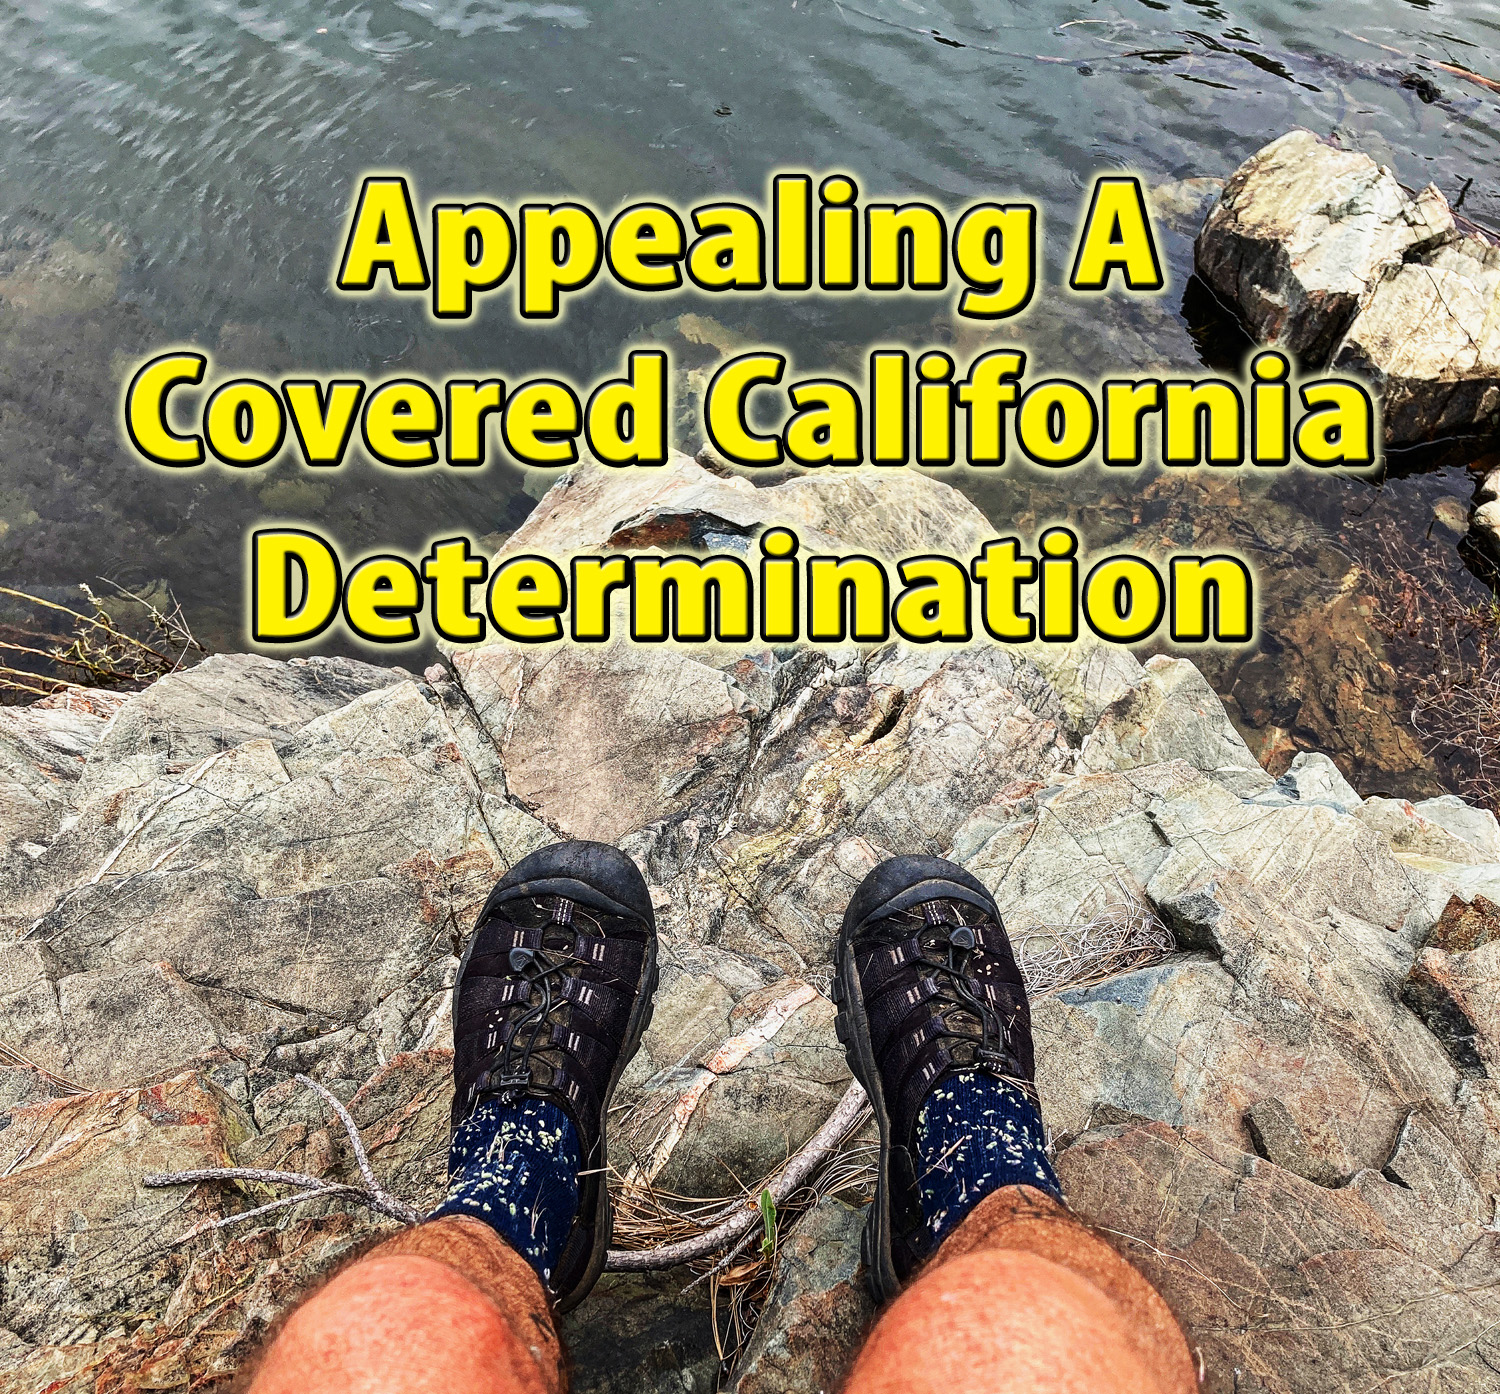 You can appeal a Covered California eligibility determination such as denial of health insurance or no subsidy.